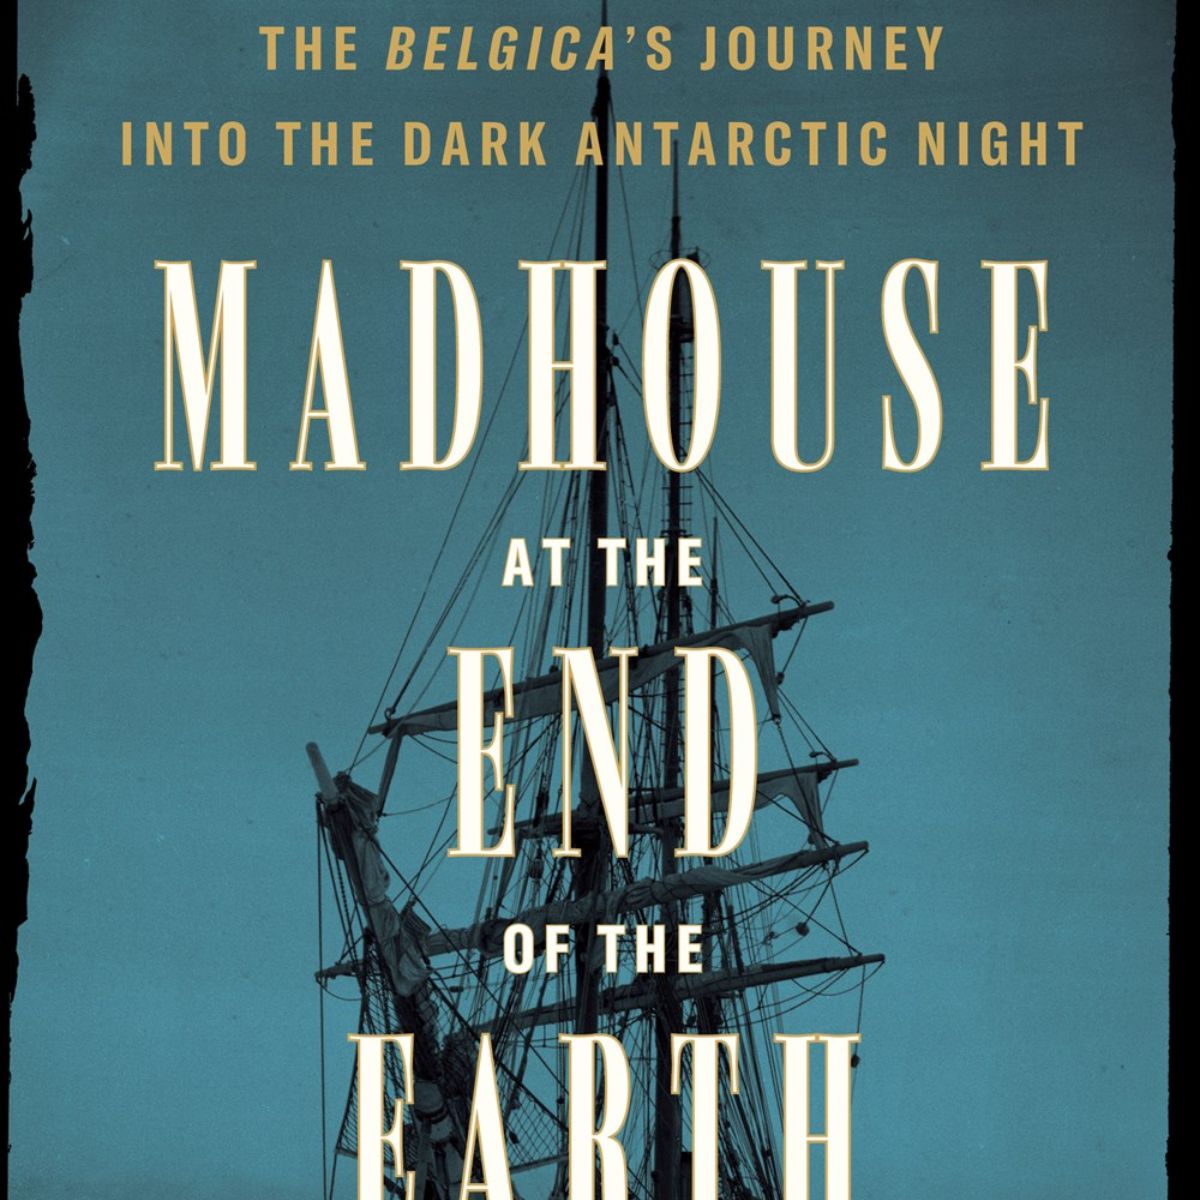 Madhouse at the End of the Earth: The Belgica's Journey Into the Dark Antarctic Night